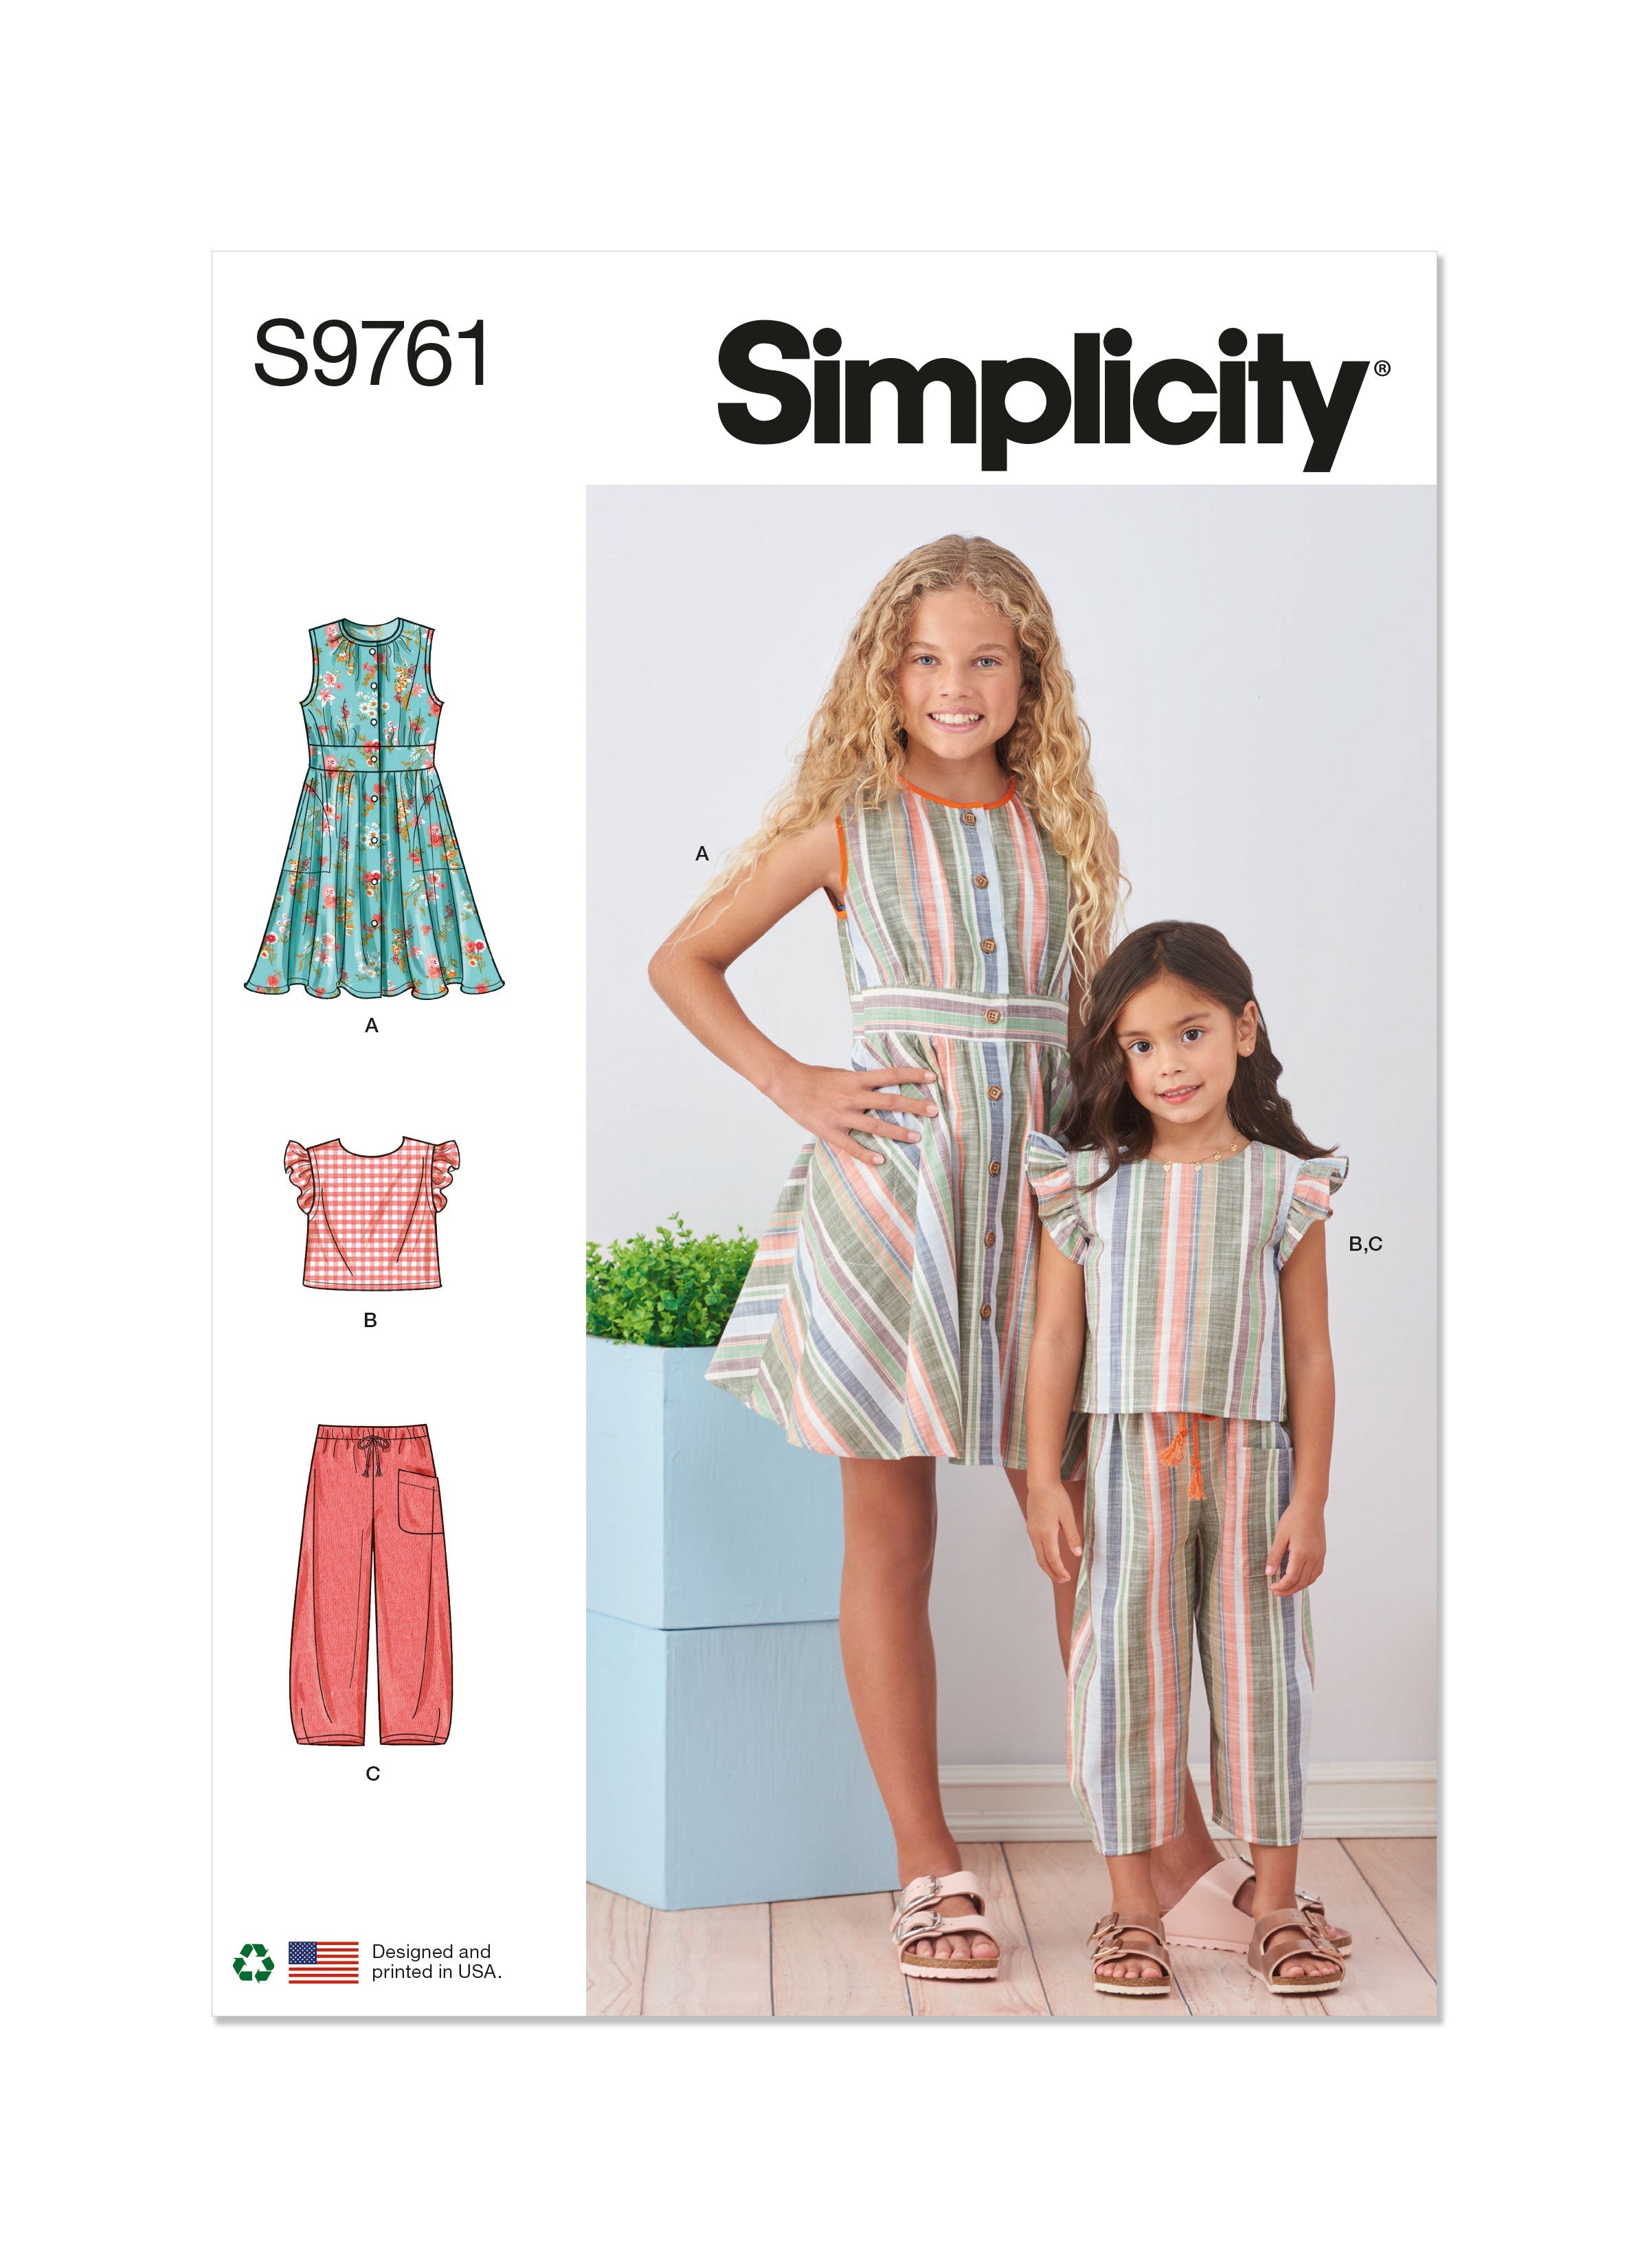 Simplicity 9761 sewing pattern Children's and Girls' Dress, Top and Pants from Jaycotts Sewing Supplies